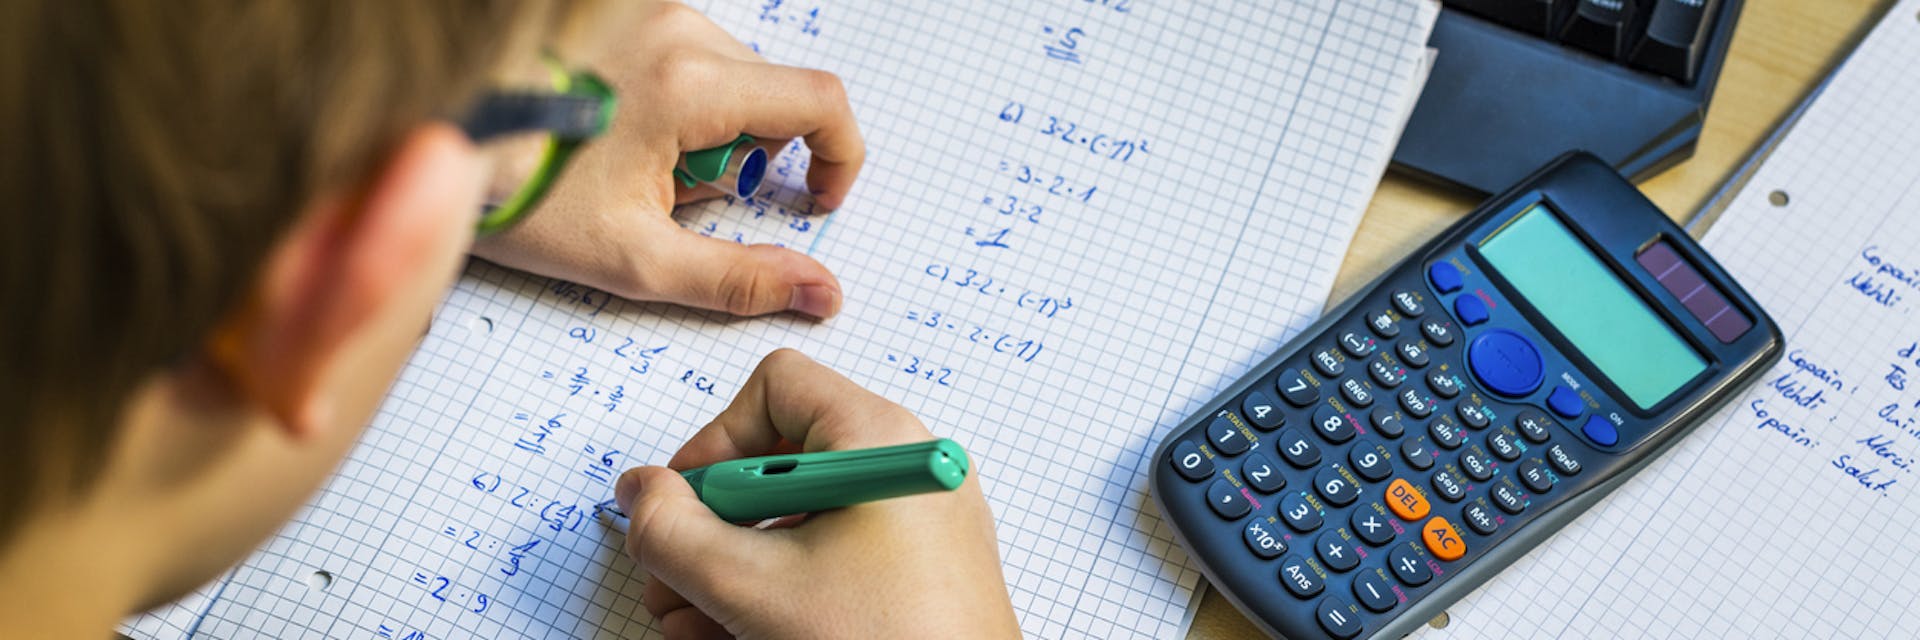 Using Online Calculator for Teaching and Learning Mathematics